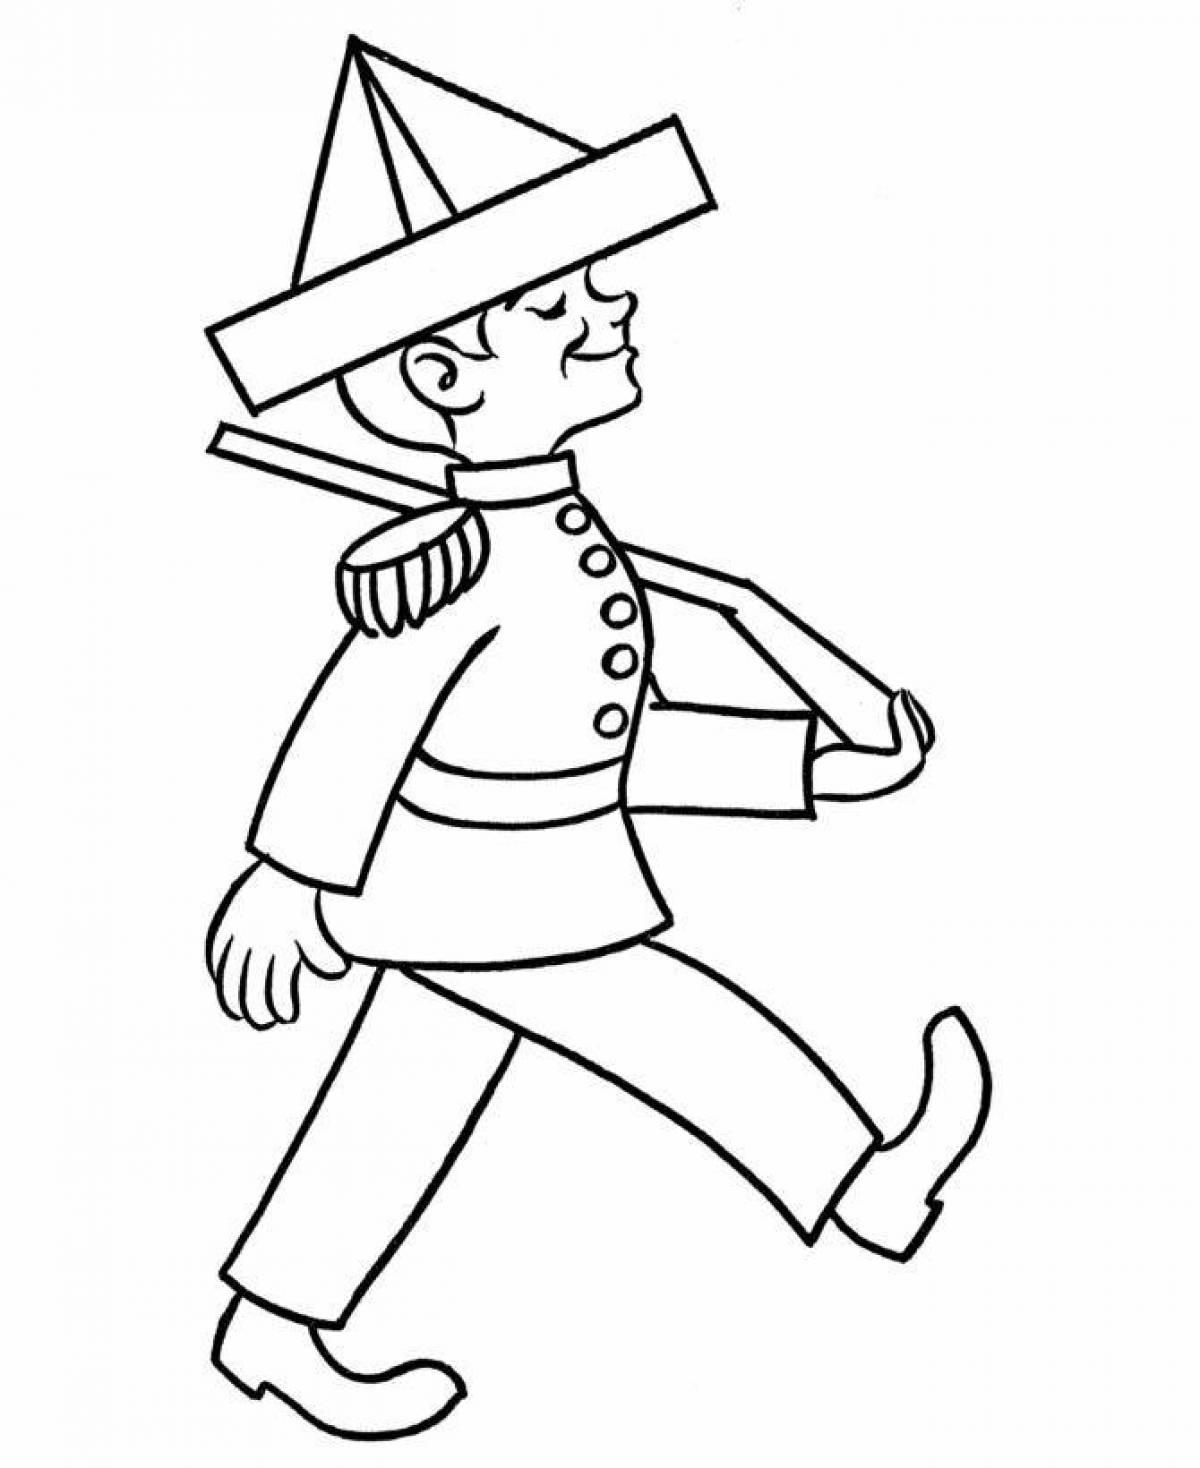 Resolute soldier coloring page